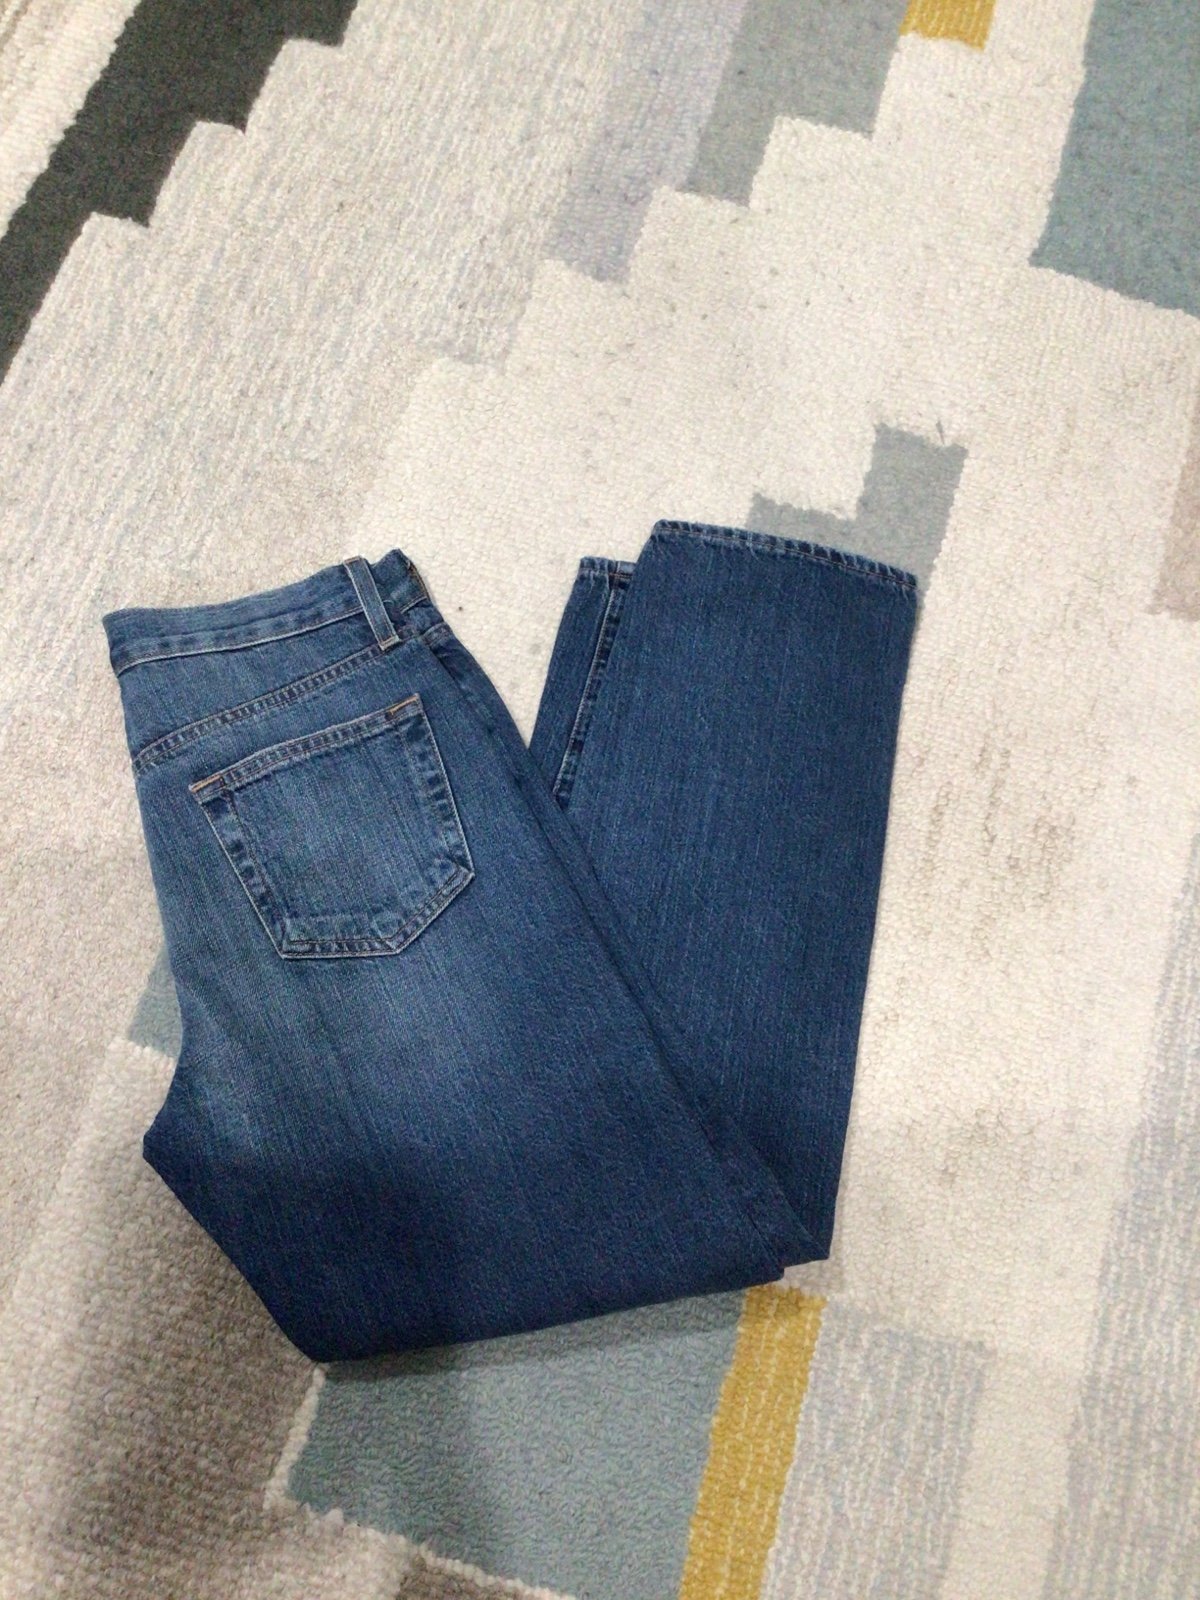 Promotions  Outerknown Organic Cotton Boyfriend Jeans. Size 24 j4rbjZjor all for you